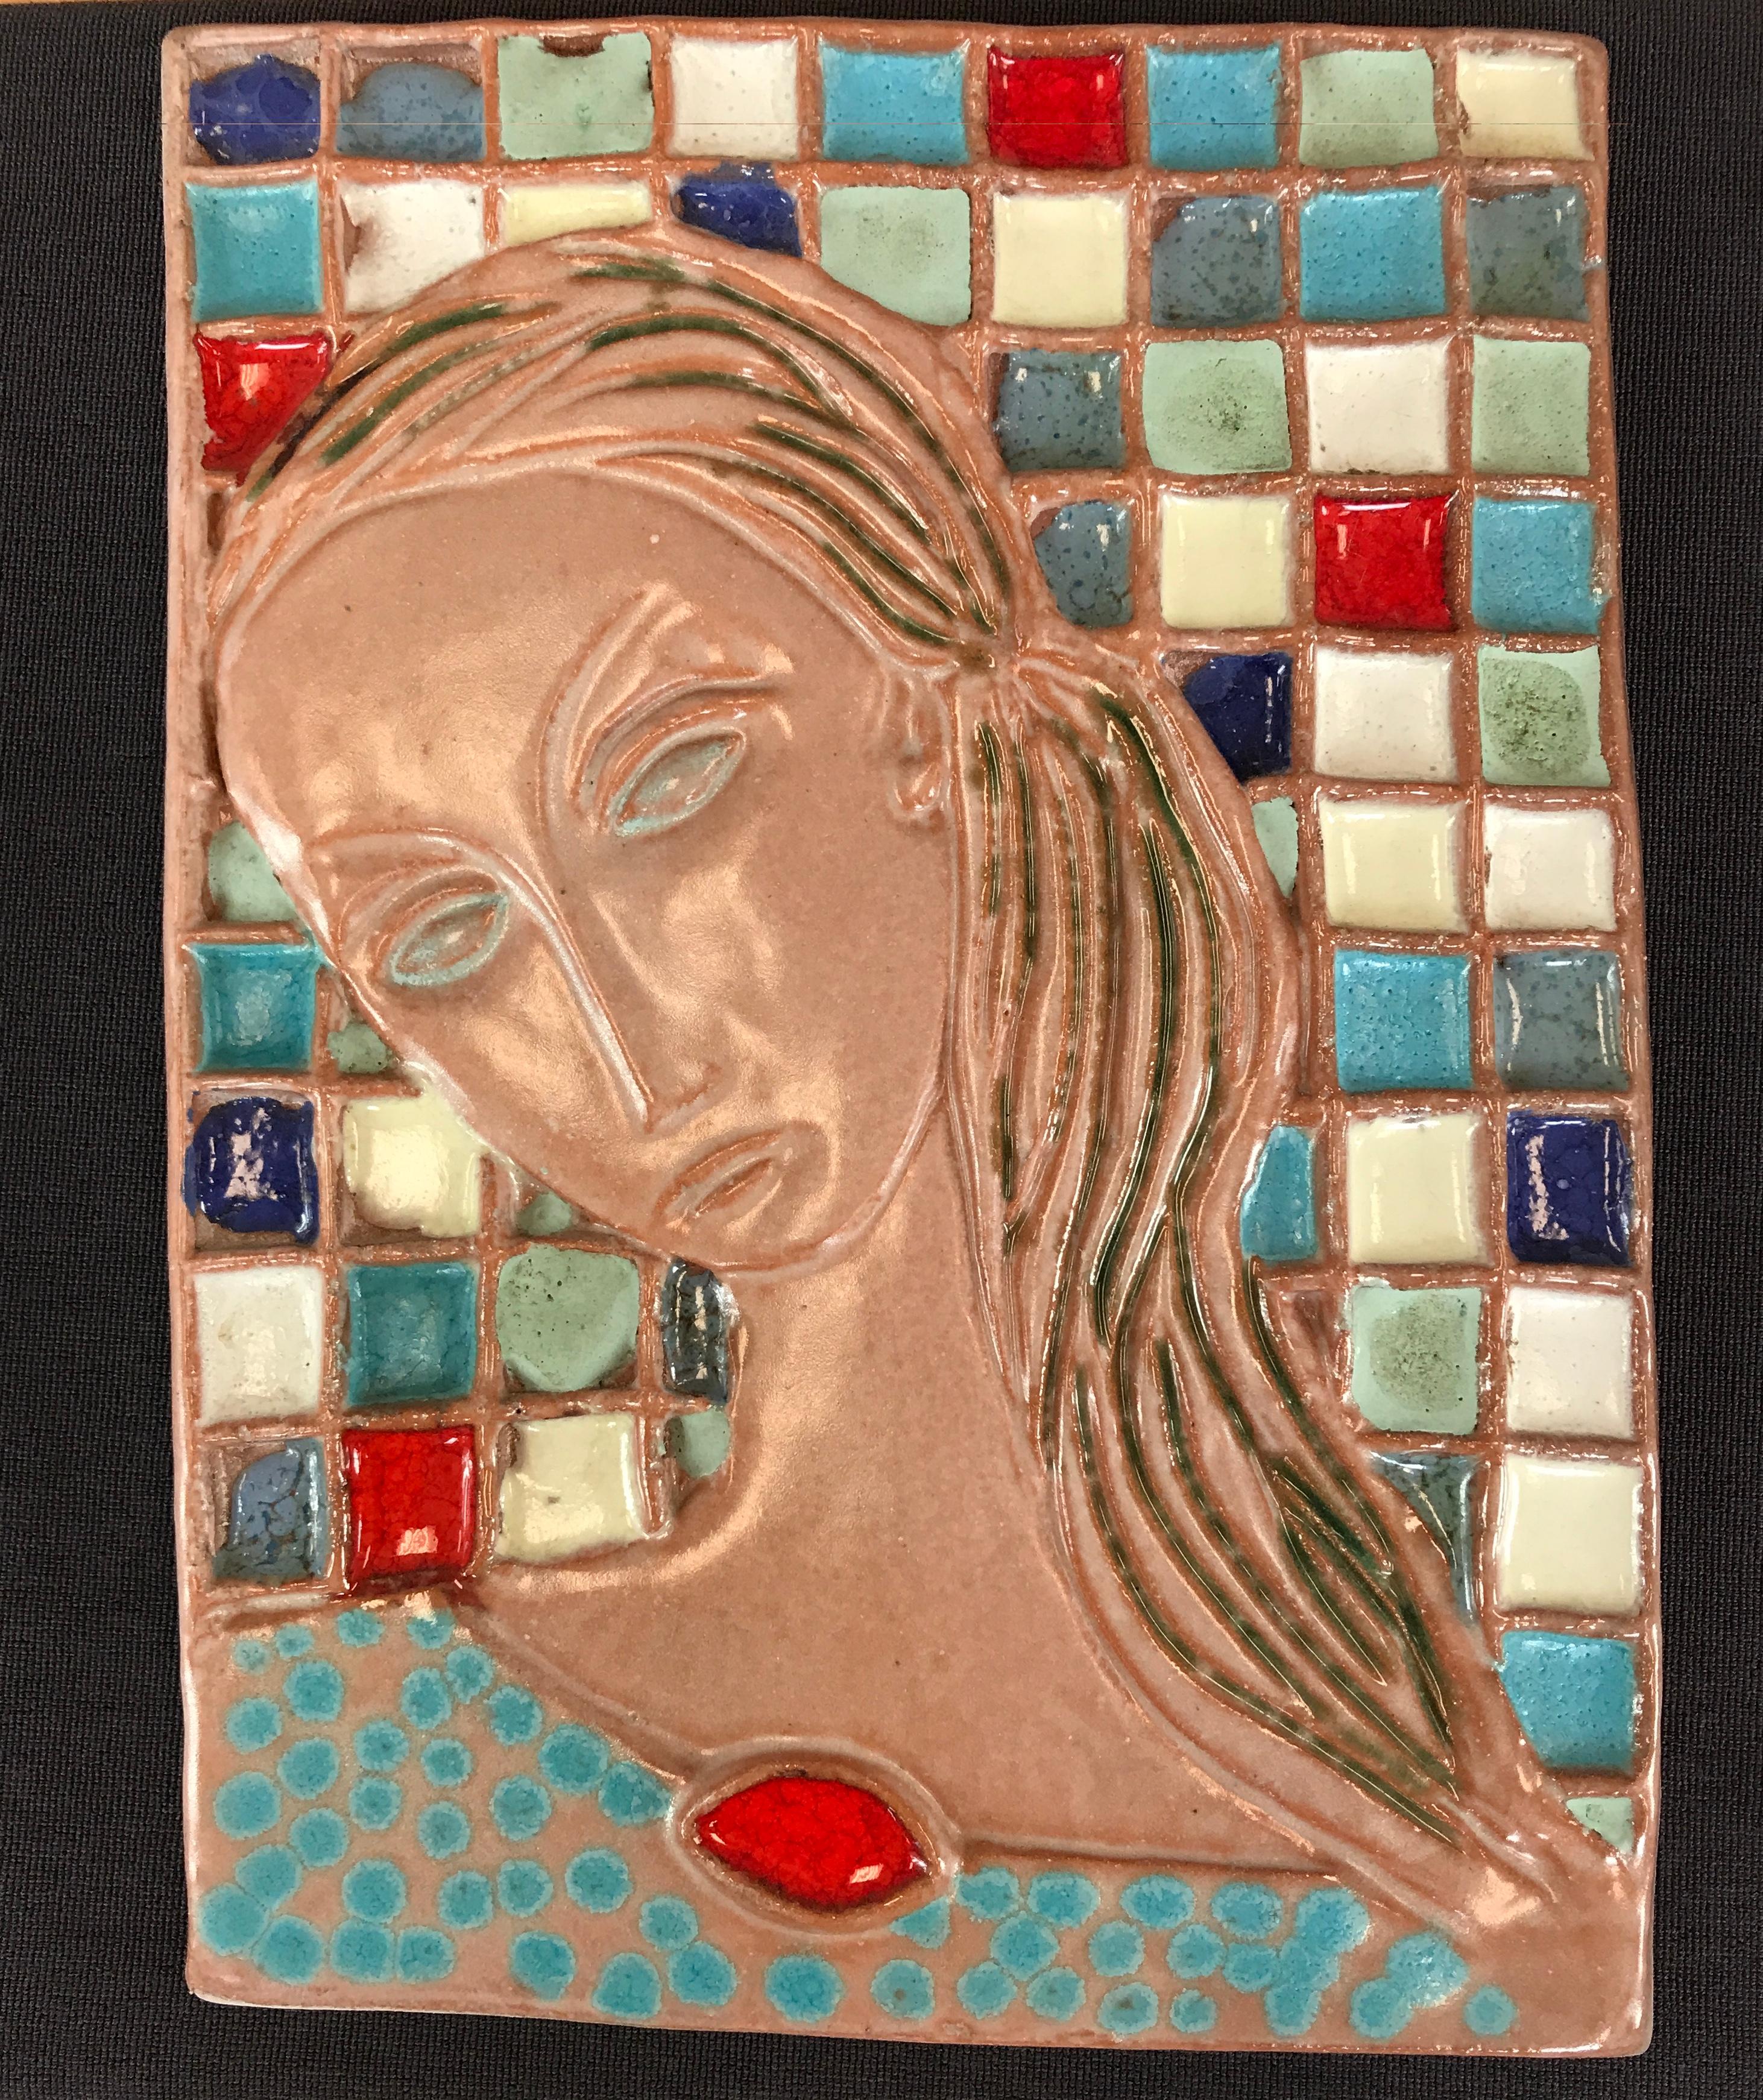 A large Harris Strong tile art, with the subject being of a woman with long hair. The back ground could remind you of a tiled wall, with the squares being many different colors.
The tile is not labeled or signed.